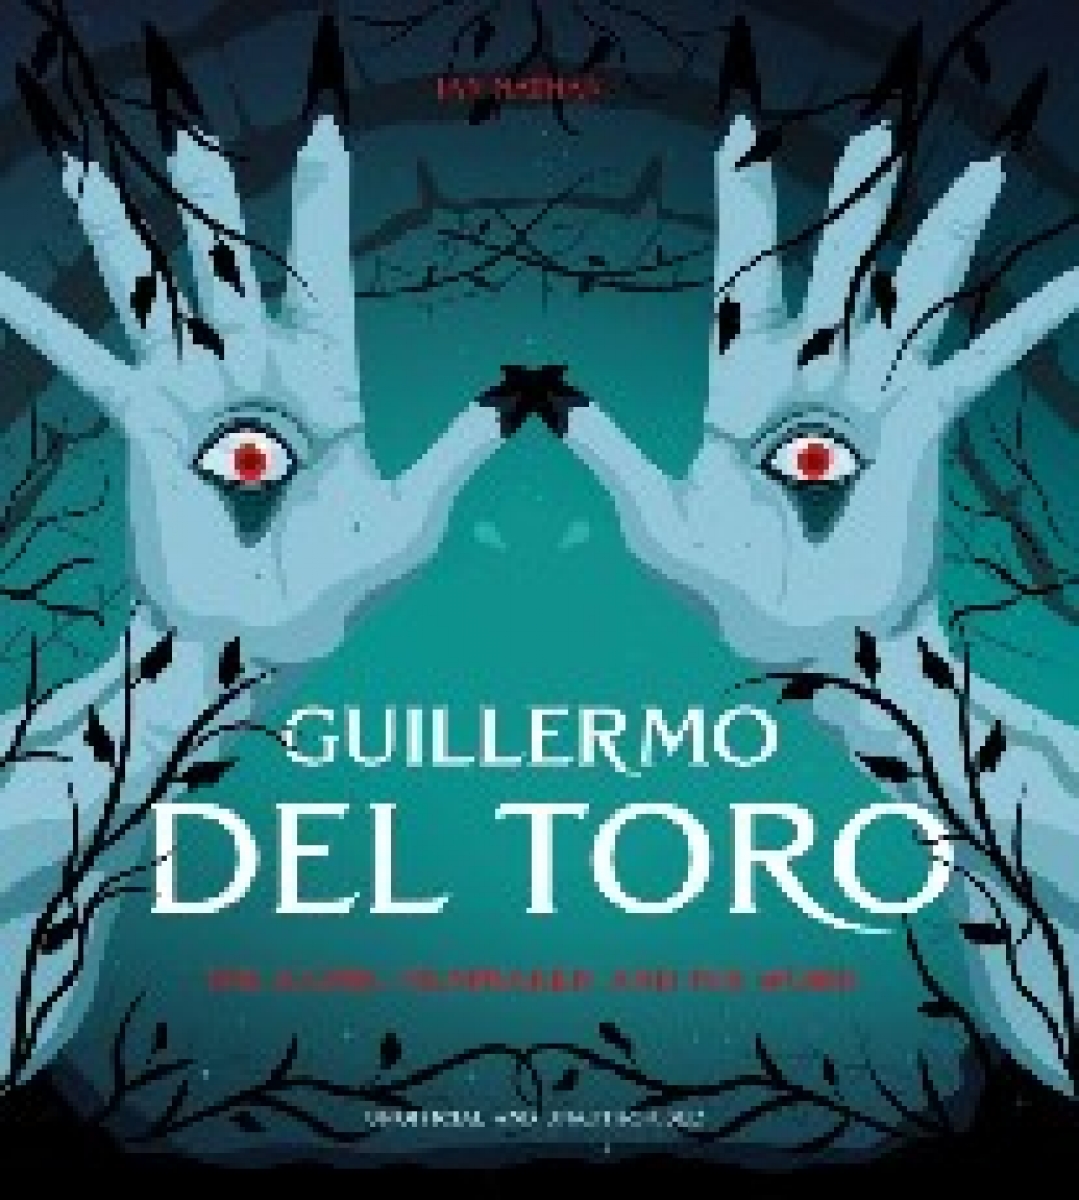 Nathan Ian Guillermo del Toro: The Iconic Filmmaker and his Work 